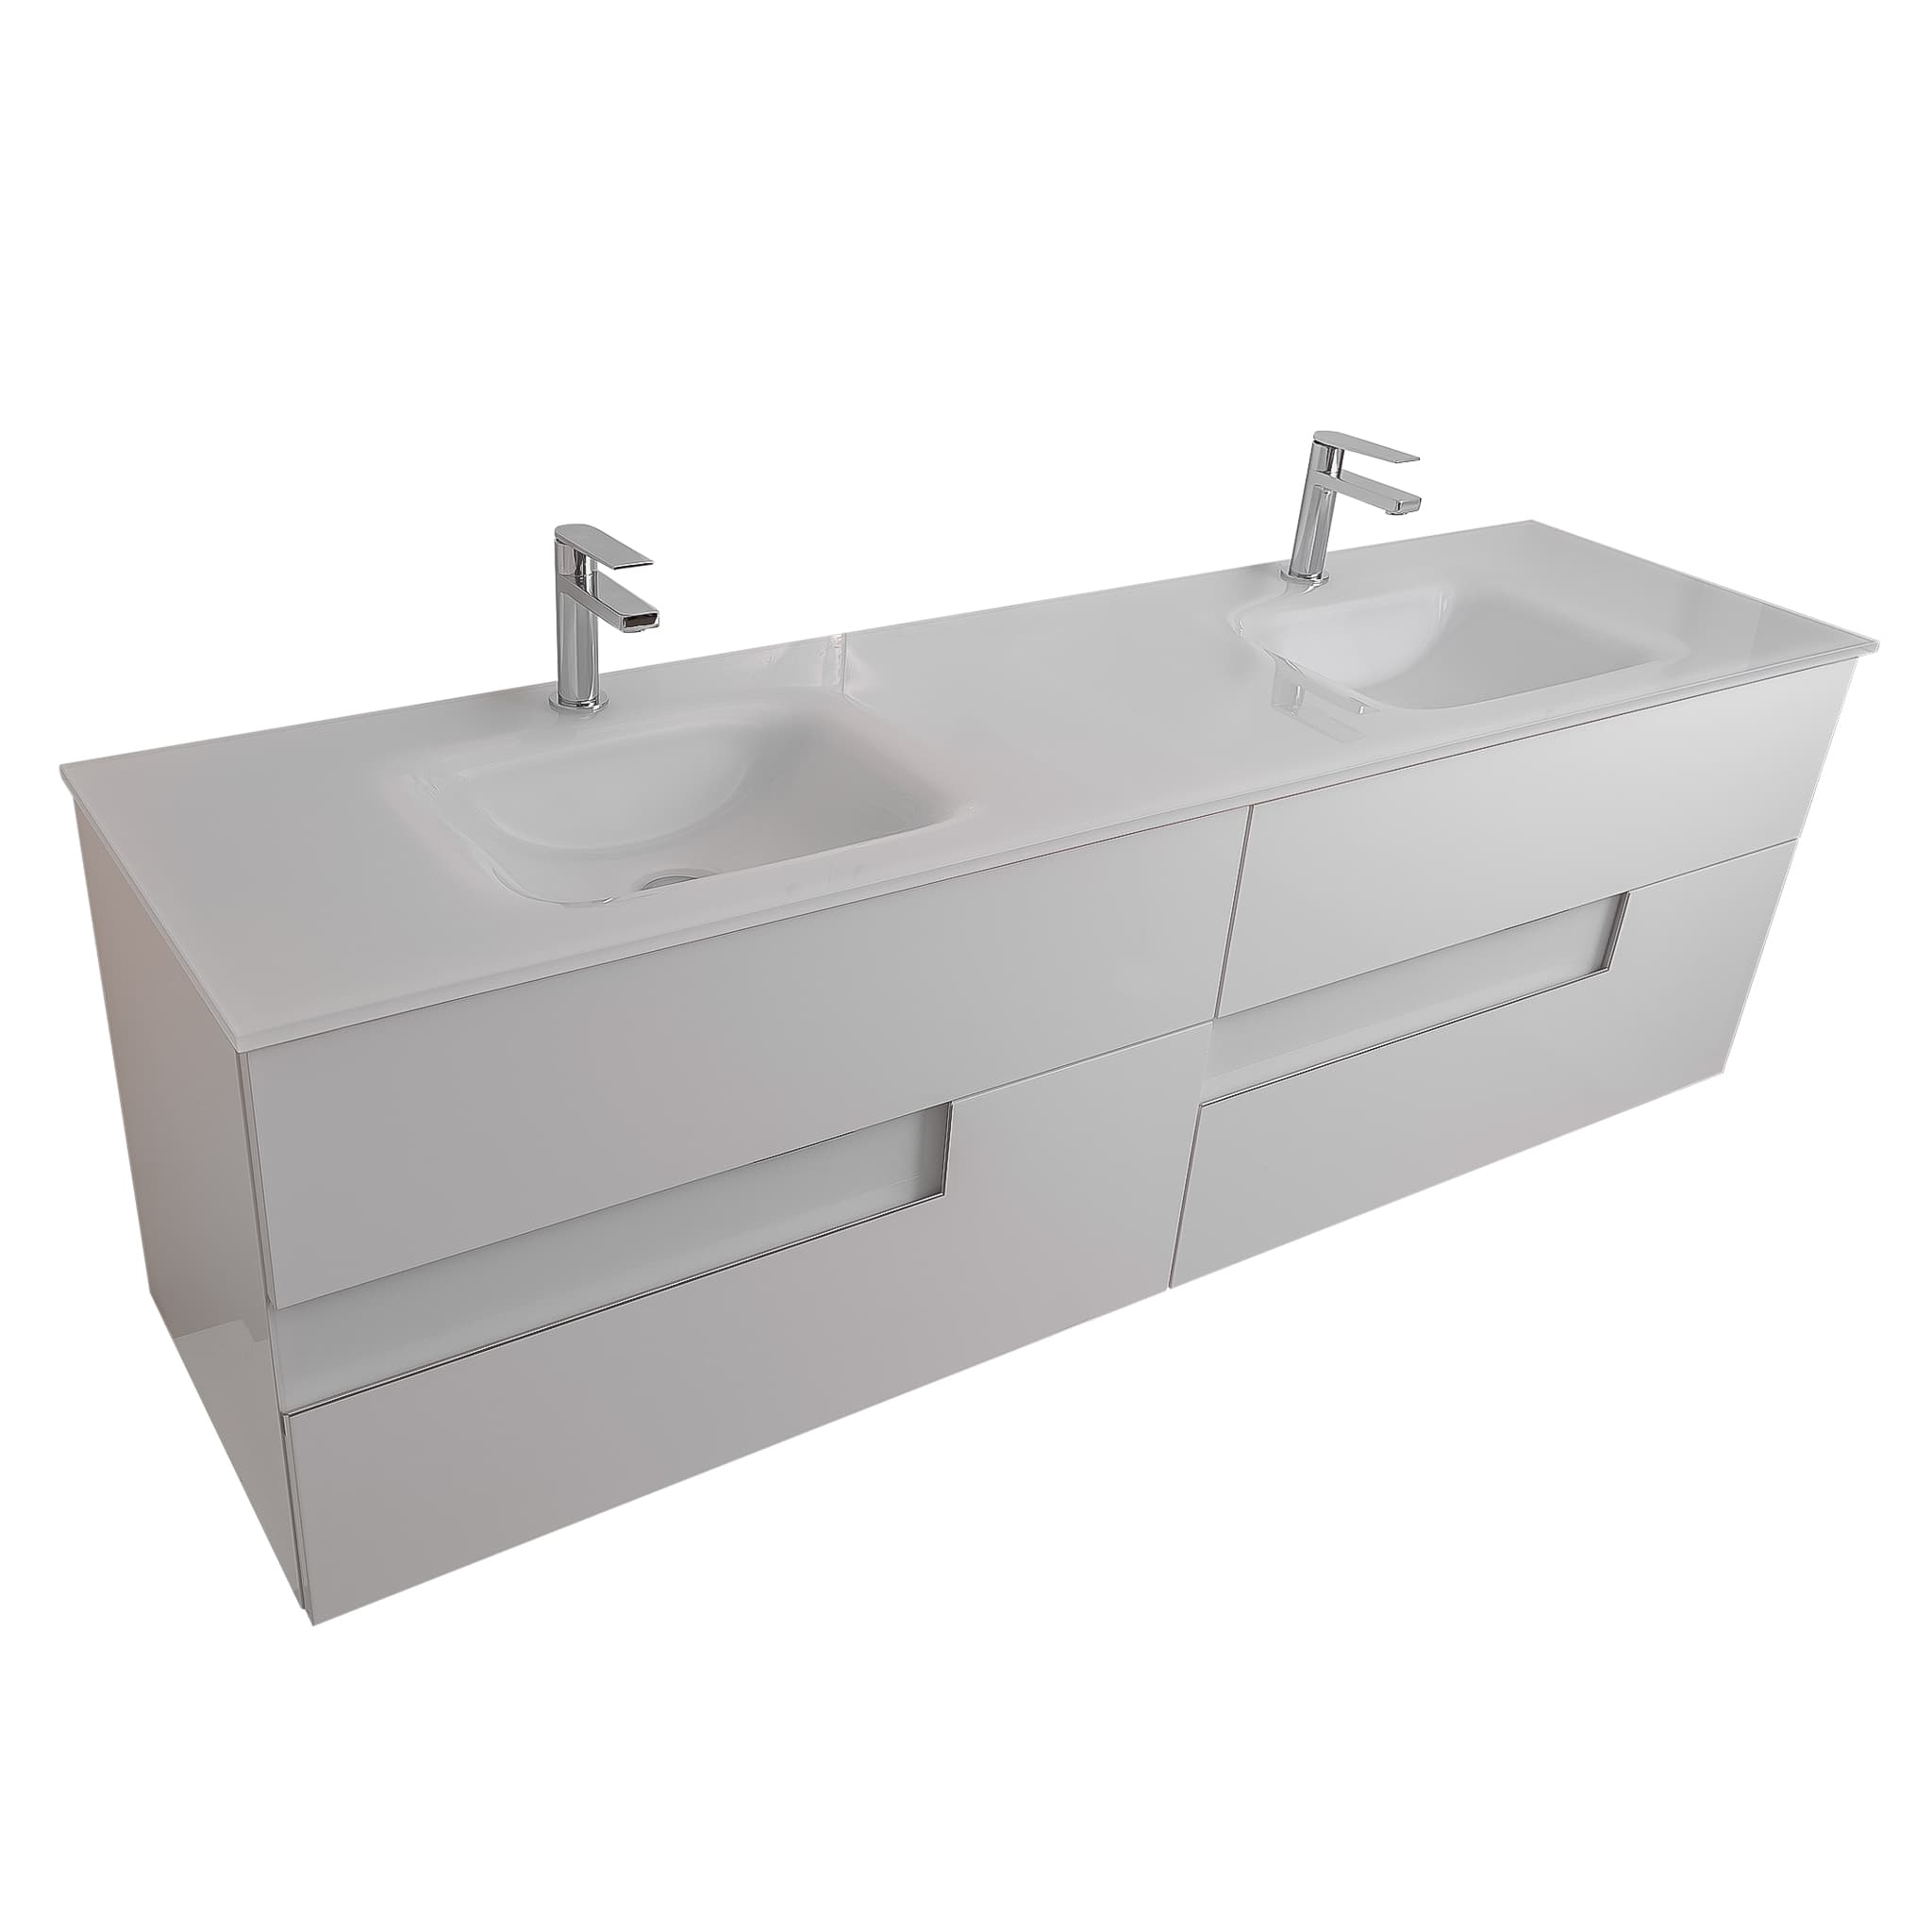 Vision 63 White High Gloss Cabinet, White Tempered Glass Double Sink, Wall Mounted Modern Vanity Set